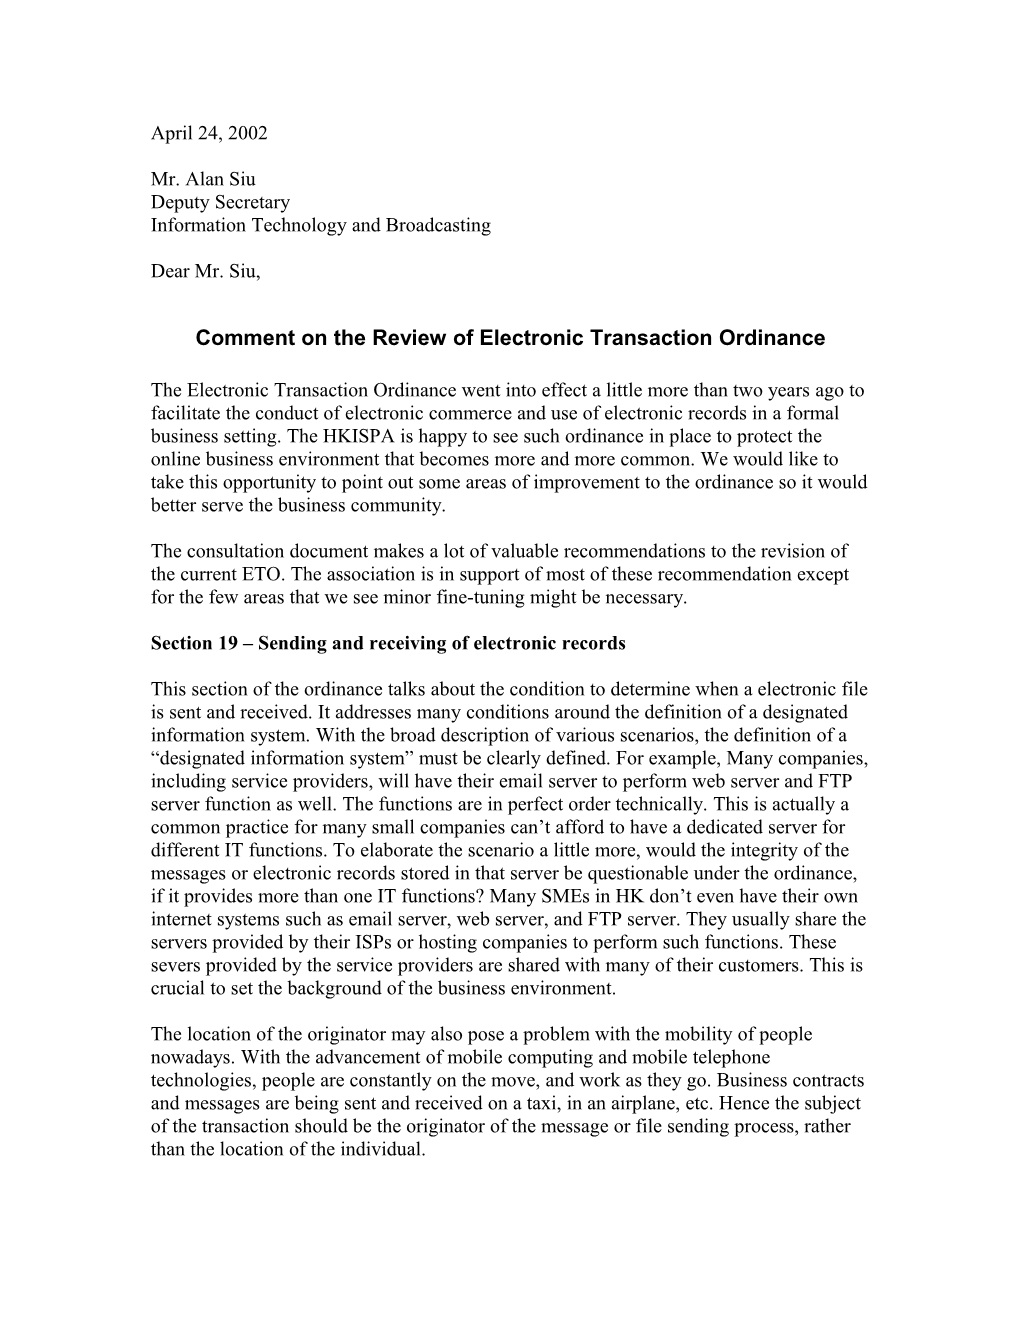 Comment on the Review of Electronic Transaction Ordinance